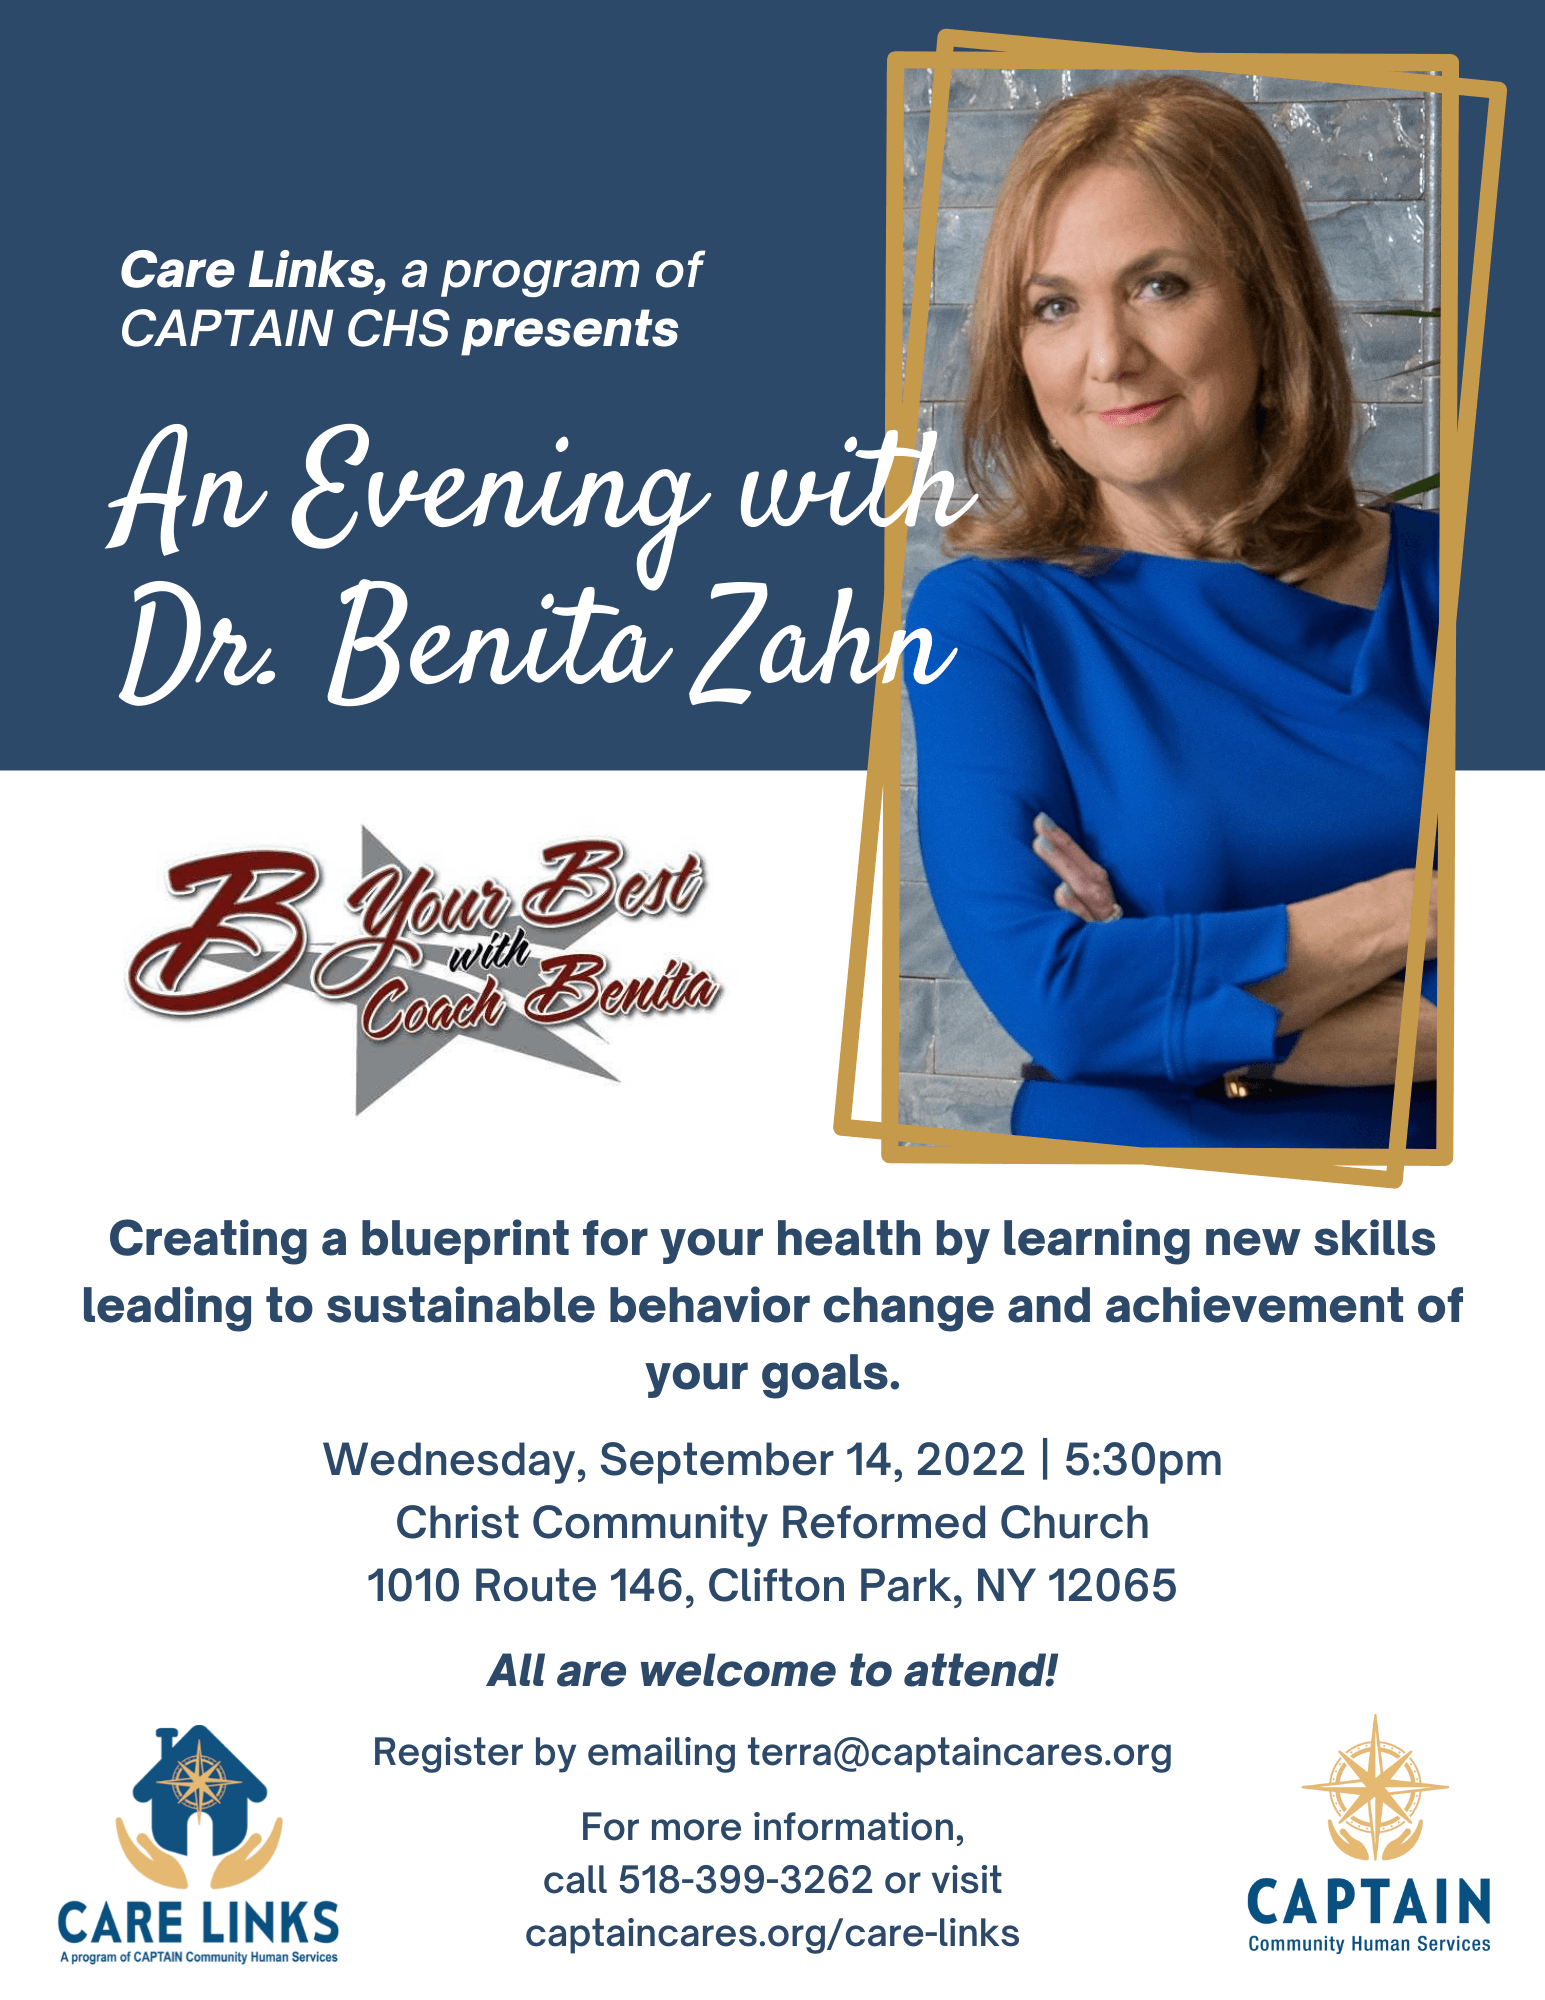 Care Links Presents B Your Best with Dr. Benita Zahn!